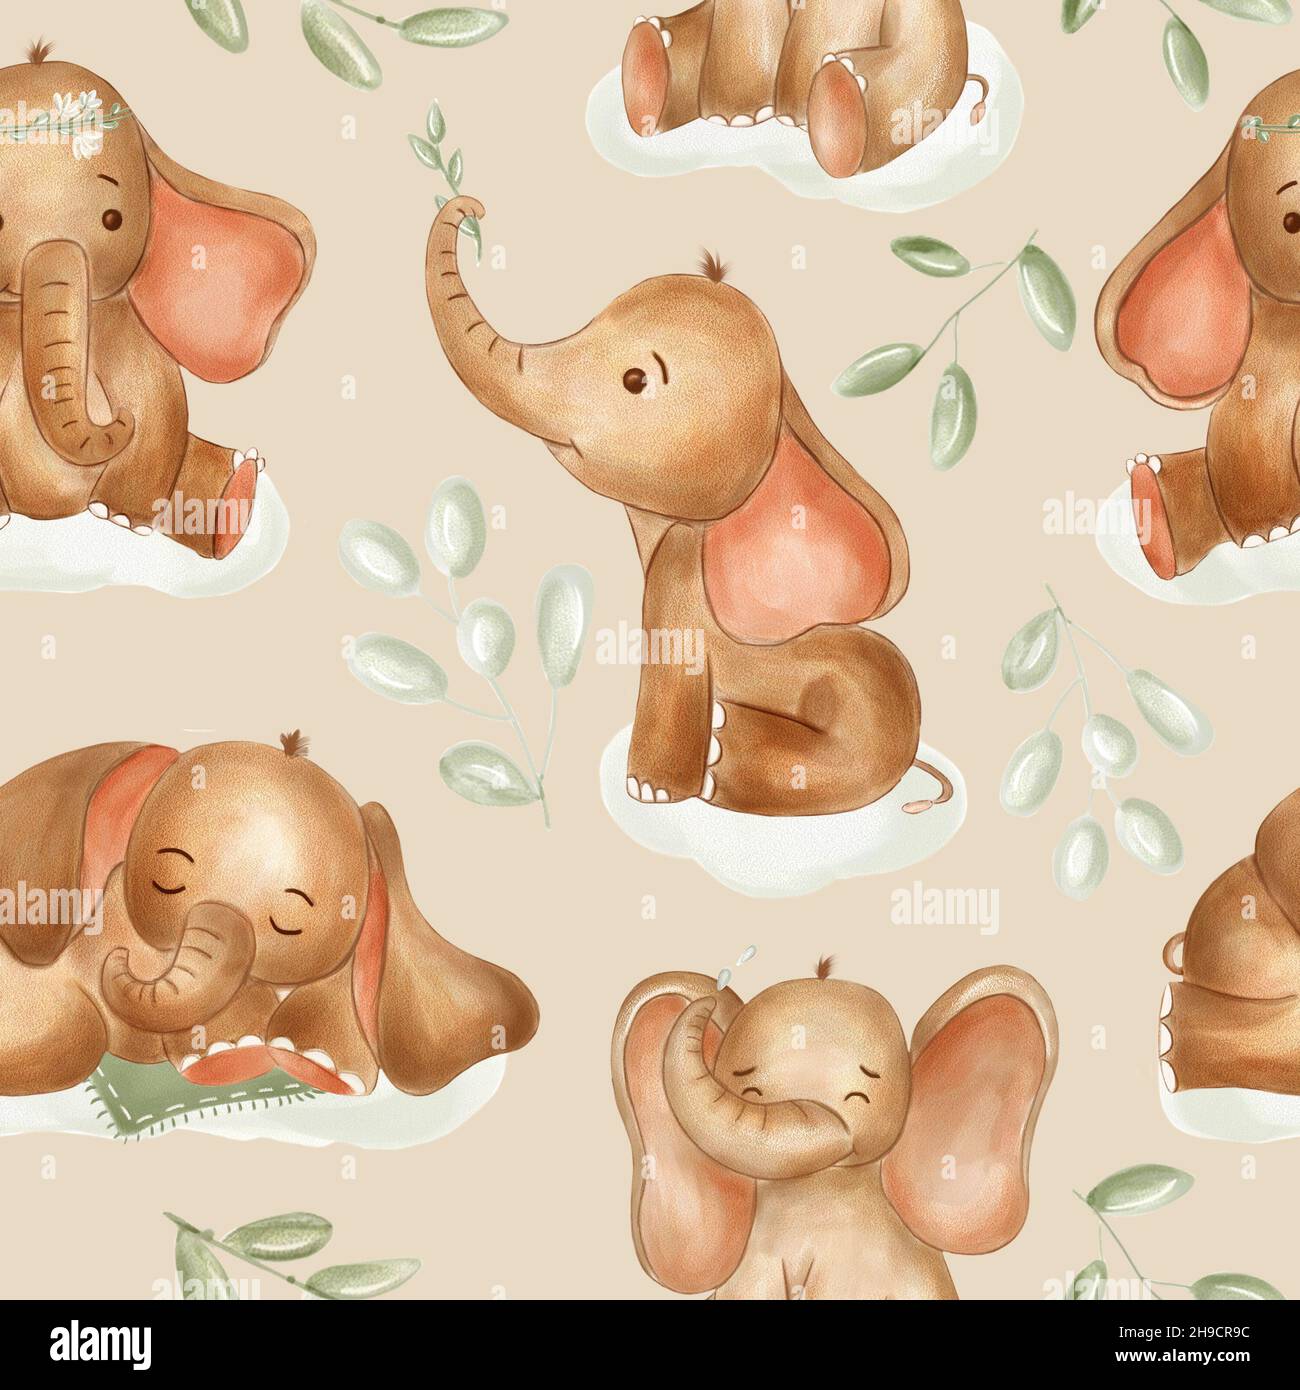 Watercolor elephants for nursery, seamless  pattern on pink background. Cute baby elefants in boho style. Use for textile, nursery, wallpapers. Stock Photo